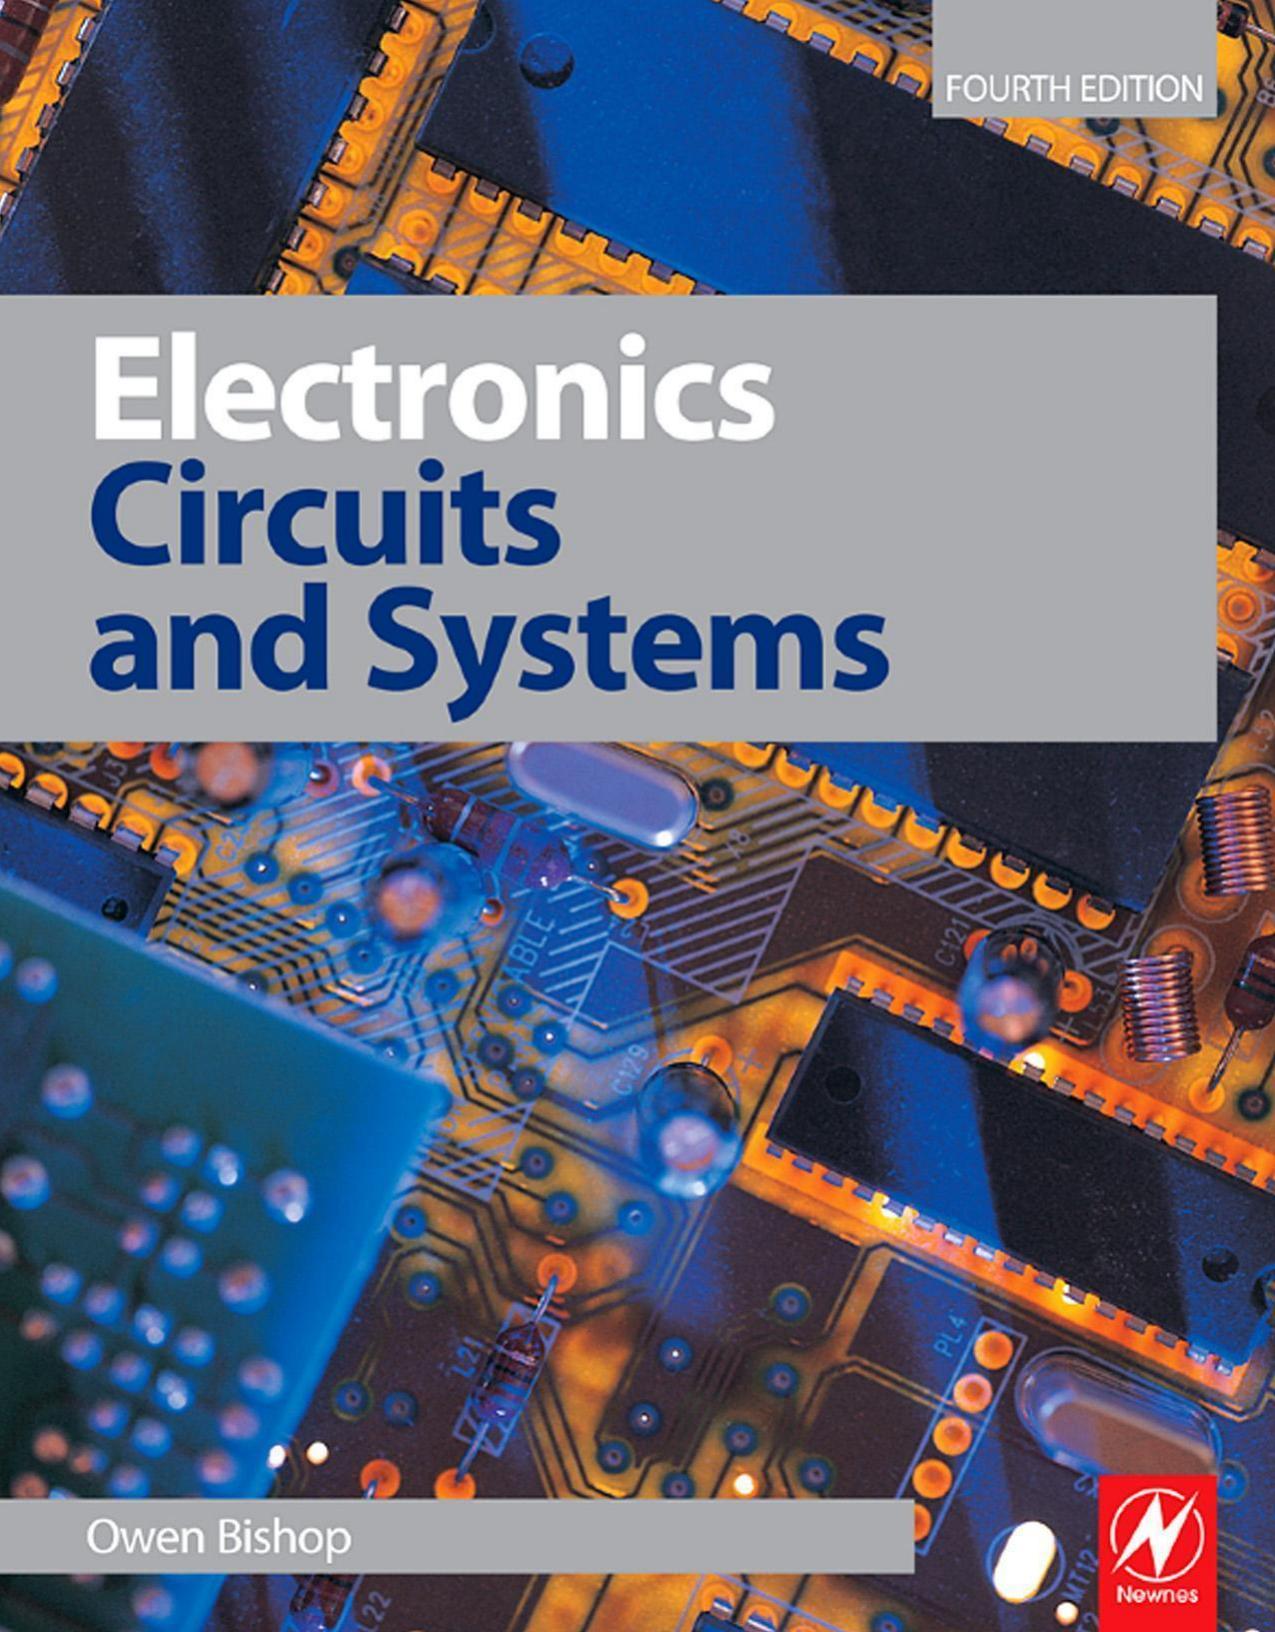 Electronics - Circuits and Systems, Fourth Edition